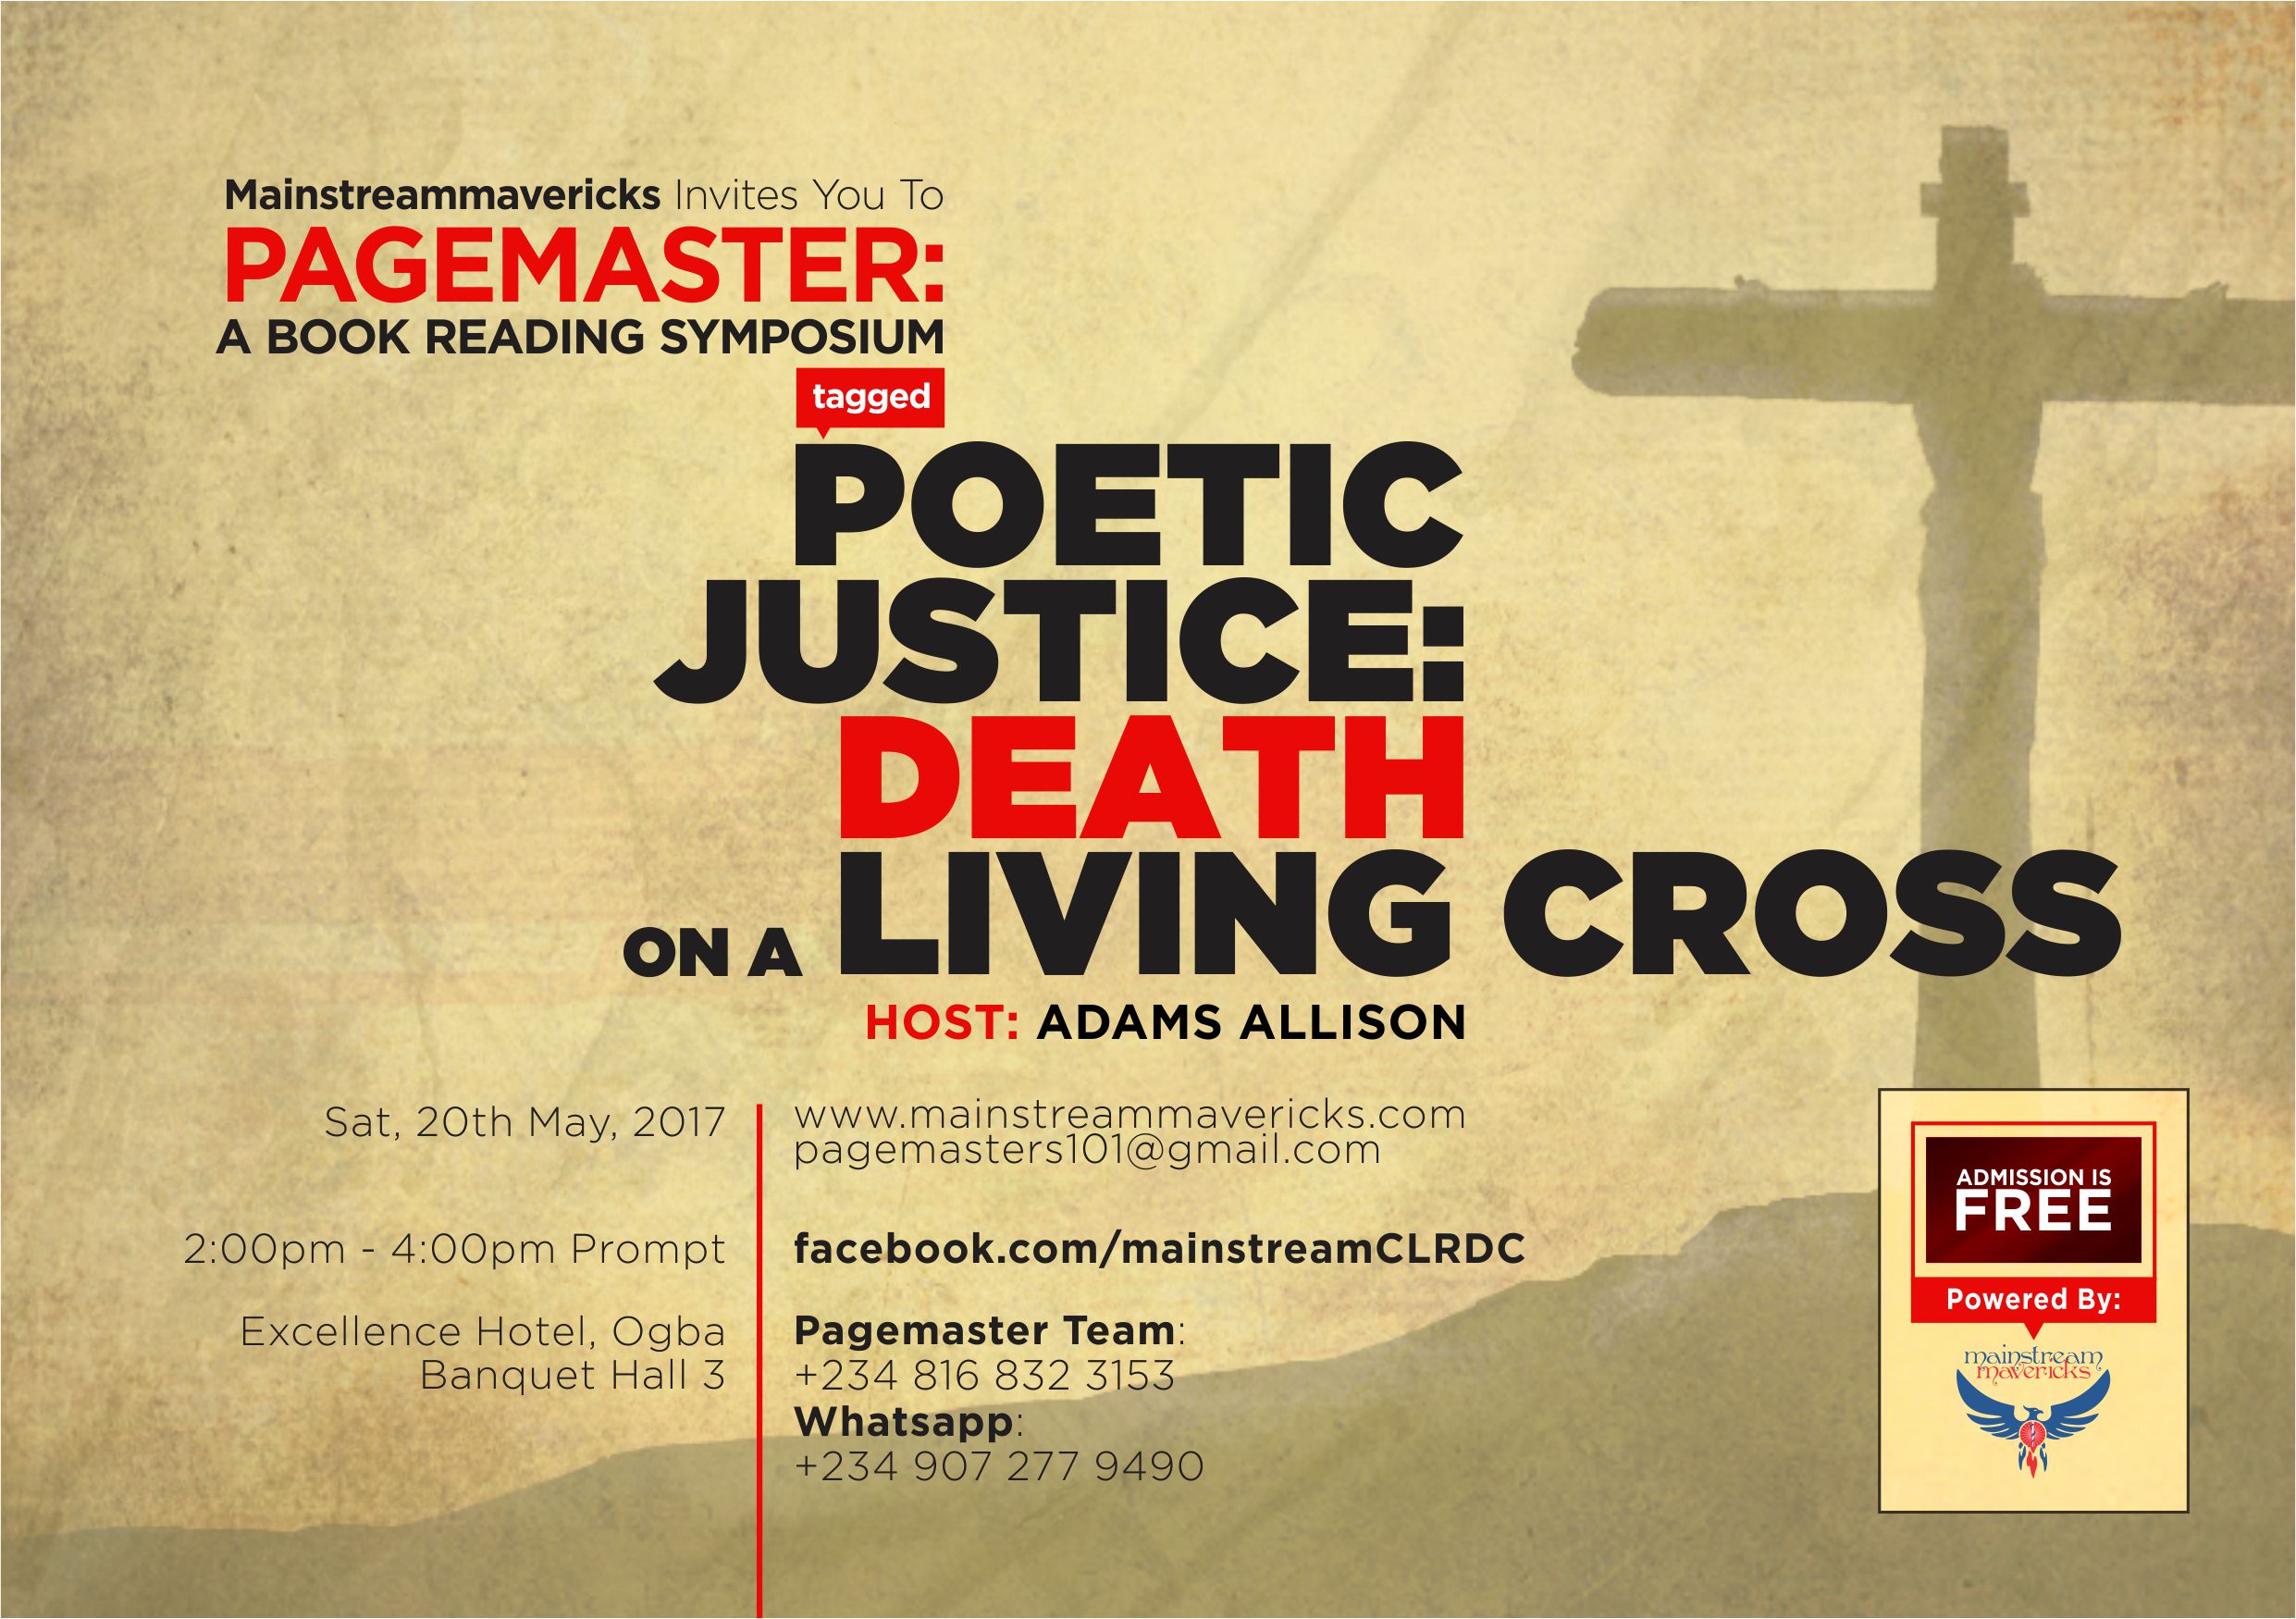 Pagemaster Symposium - Poetic Justice: Death on a Living Cross